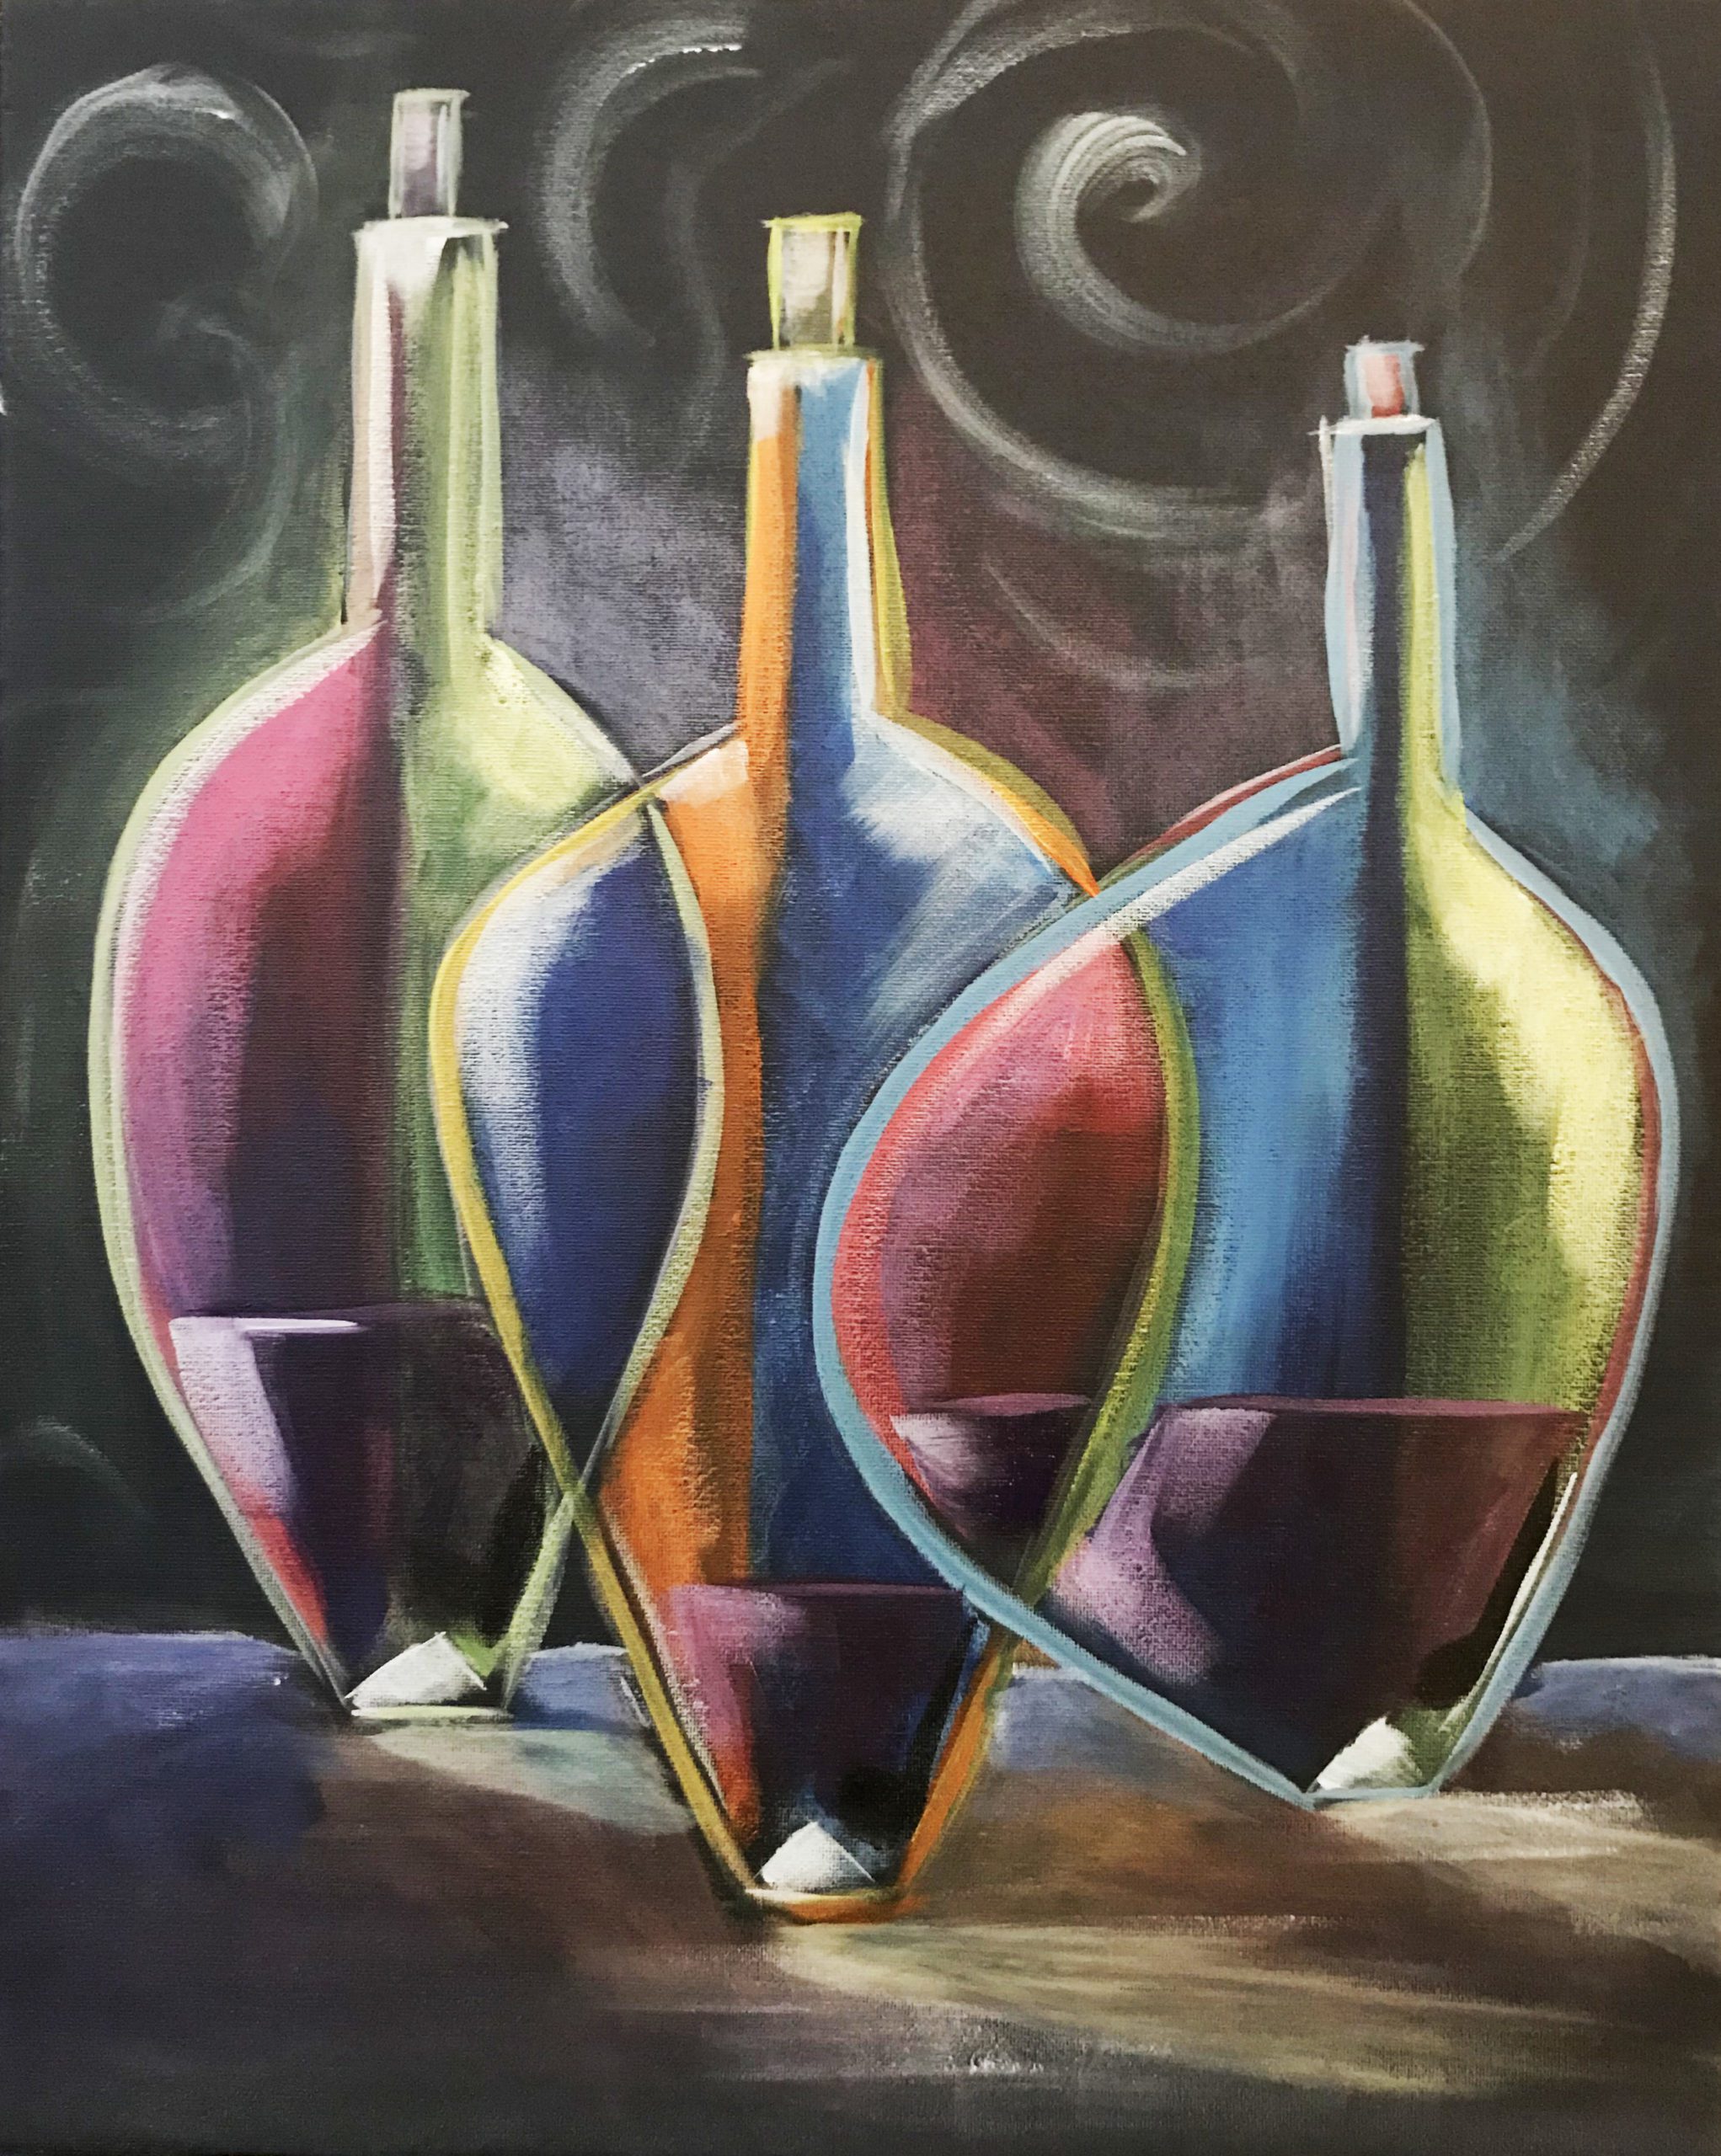 Image of painting called Three Bottles paint and sip painting event at Brick and Barrel in Lincoln.